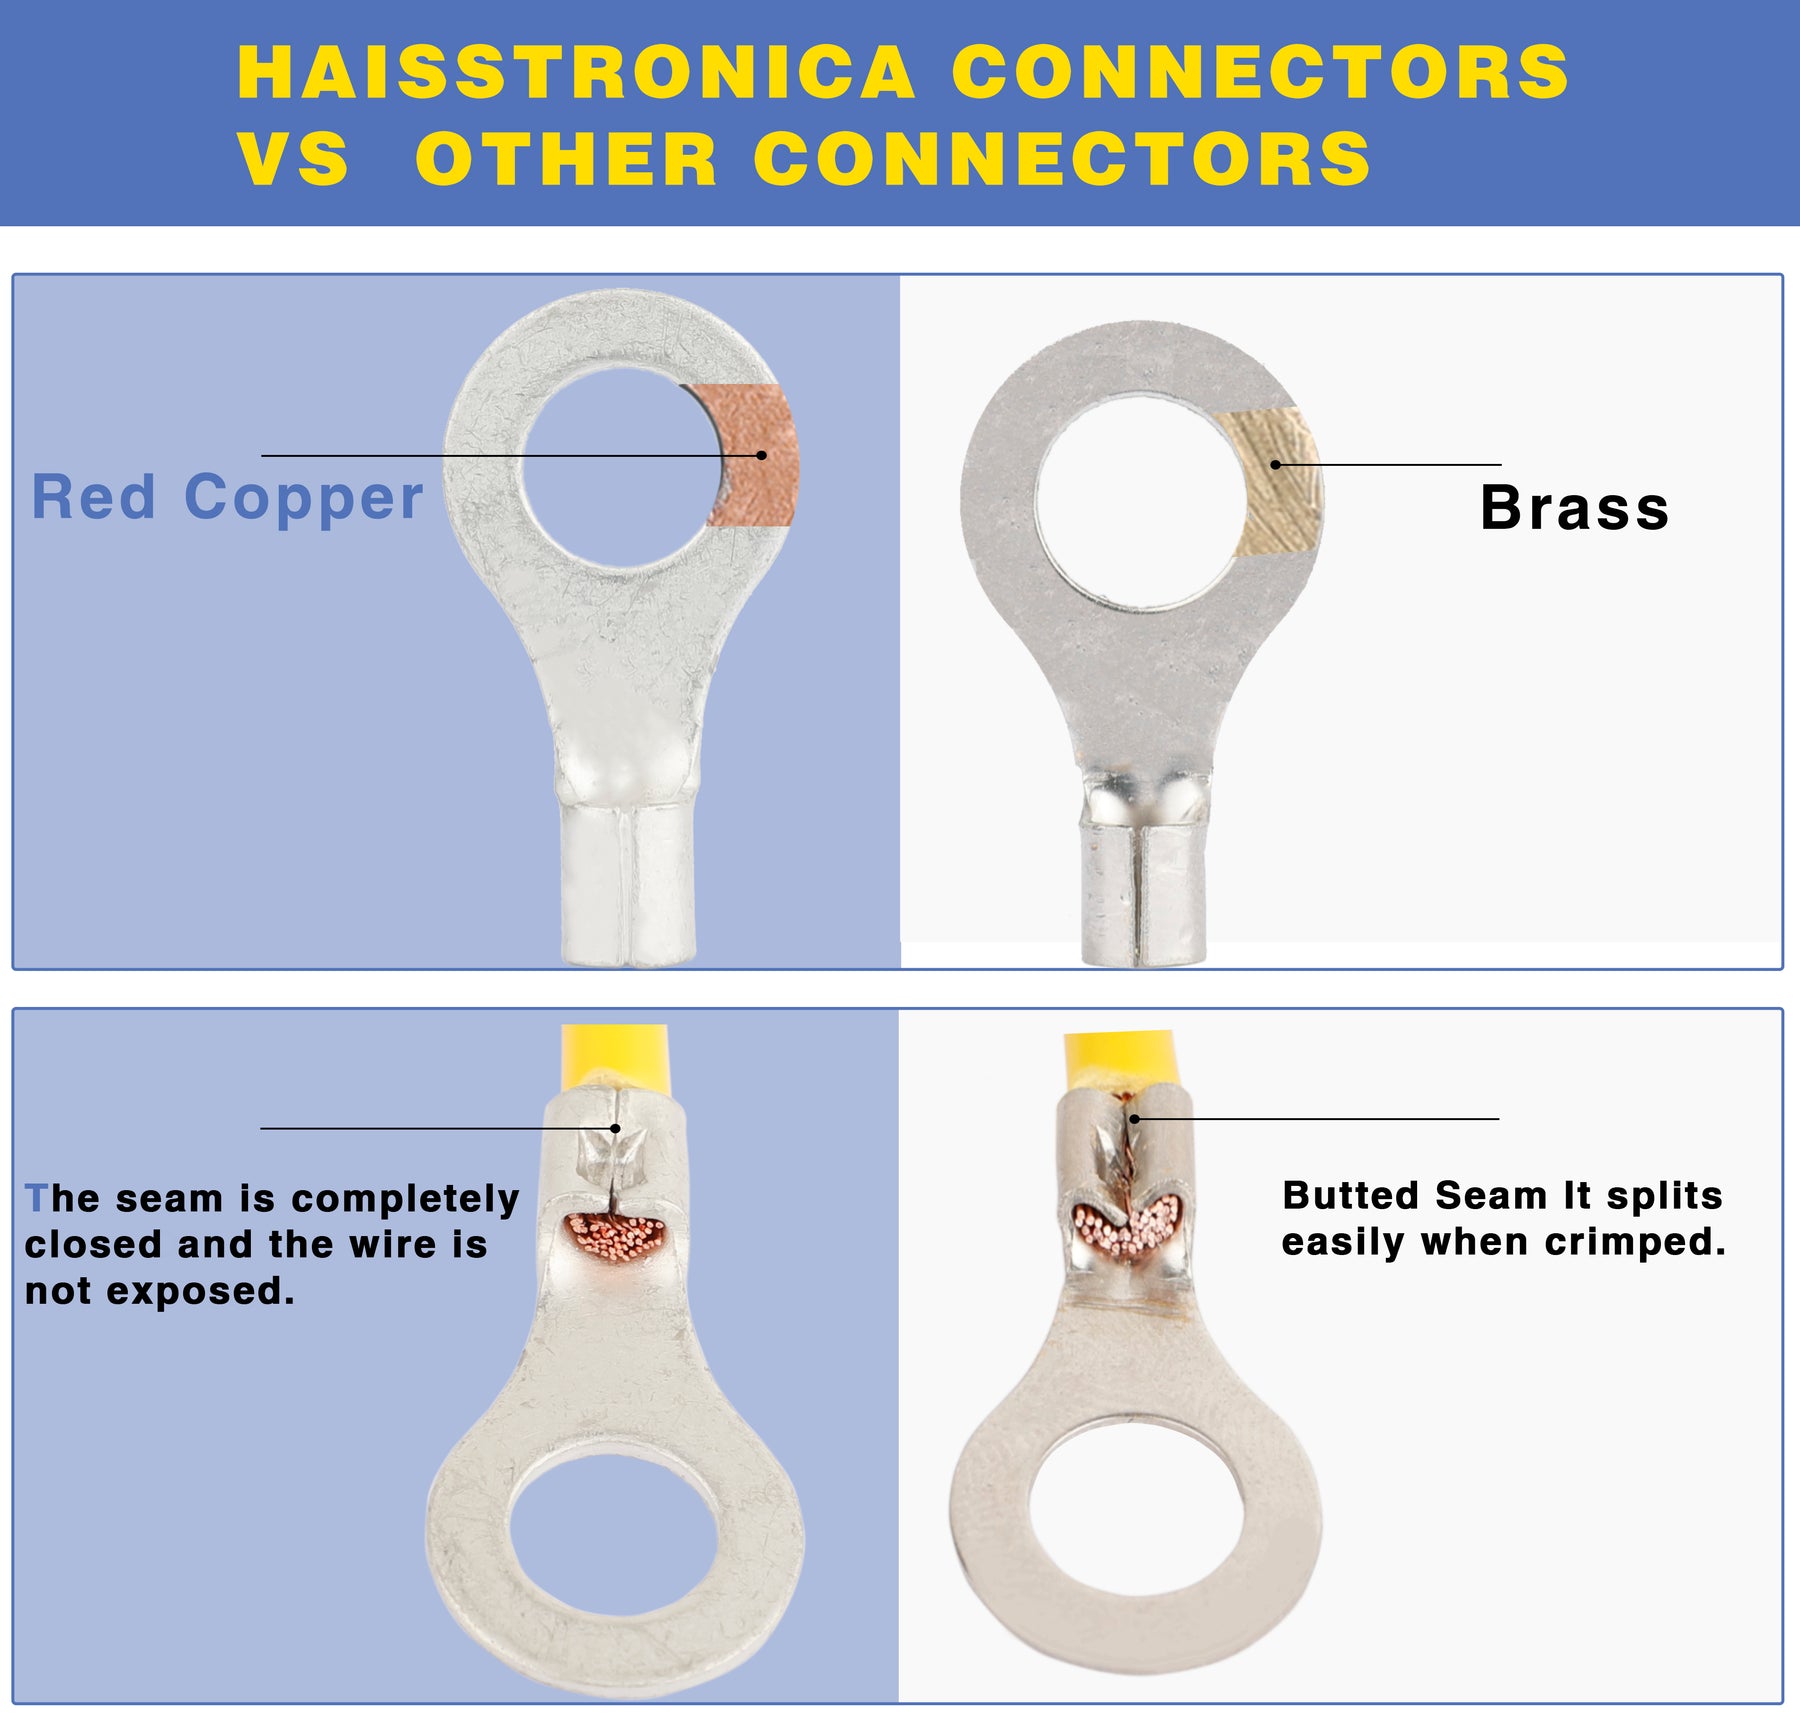 520PCS  Marine Grade Heat Shrink Wire Connectors Kit | Waterproof Wire Connectors | Tinned Red Copper